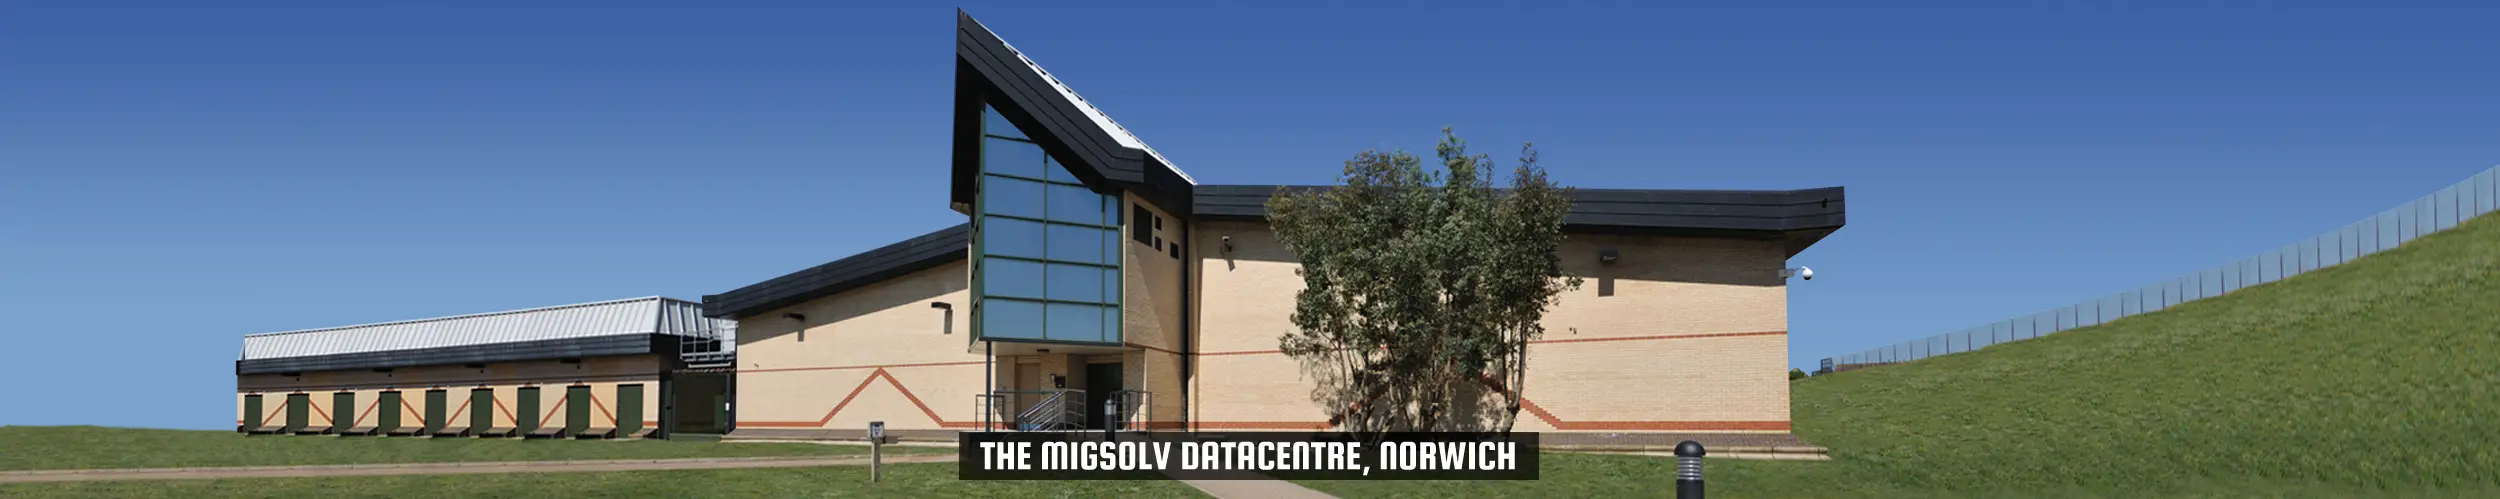 52Degrees data centre - feature image | "the Migsolv Data Centre, Norwich " | image of the Migsolv Data Centre in Norwich | Telecoms Solutions, Norwich